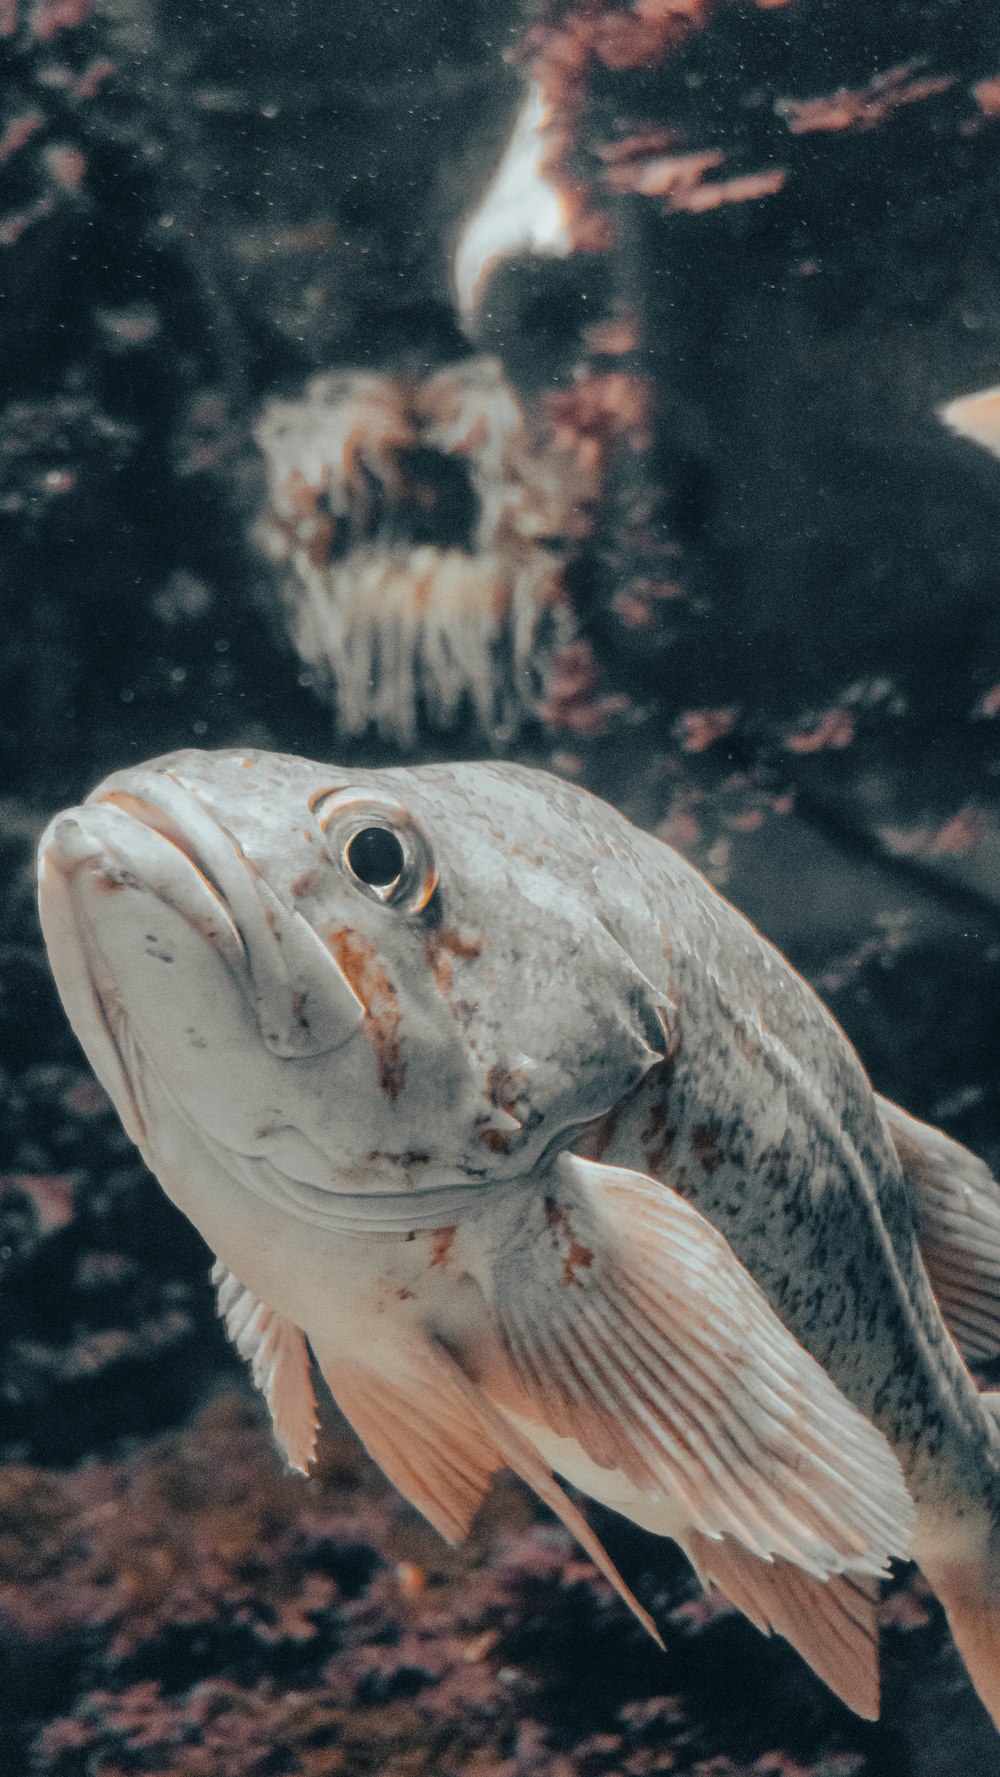 grey and white fish in close up photography